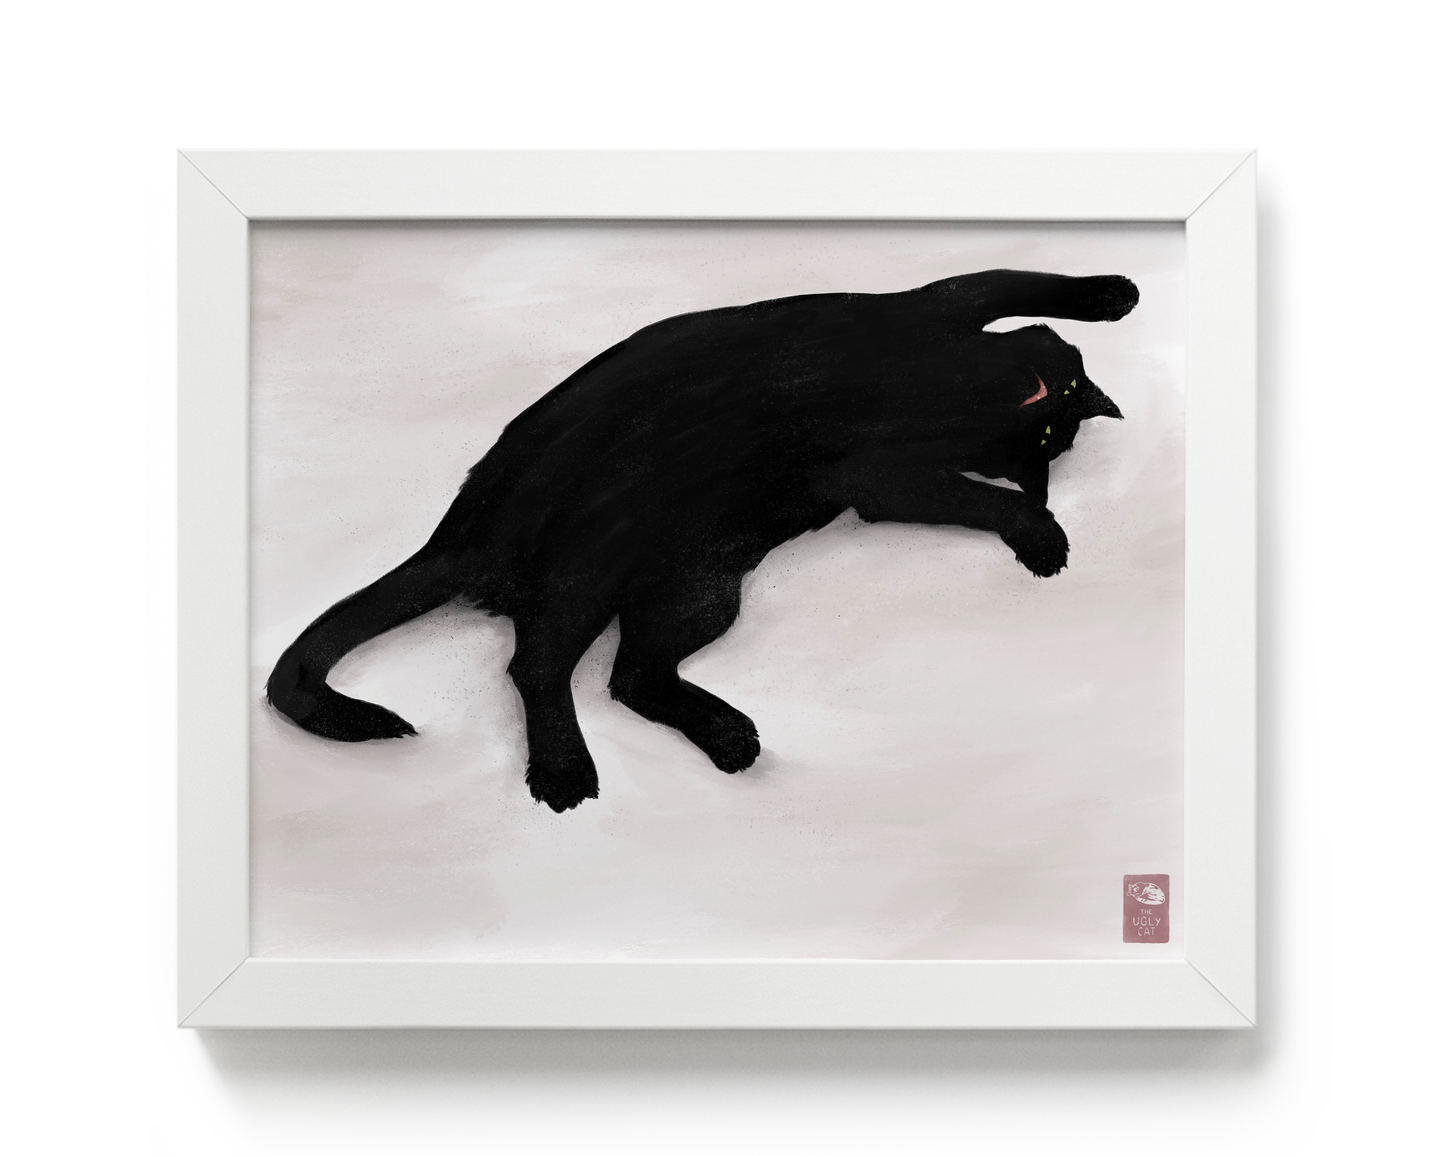 "Sillhouette of Woodhouse" by Catherine Hébert - Cat Silhouette Giclee Art Print - 8"x10" size